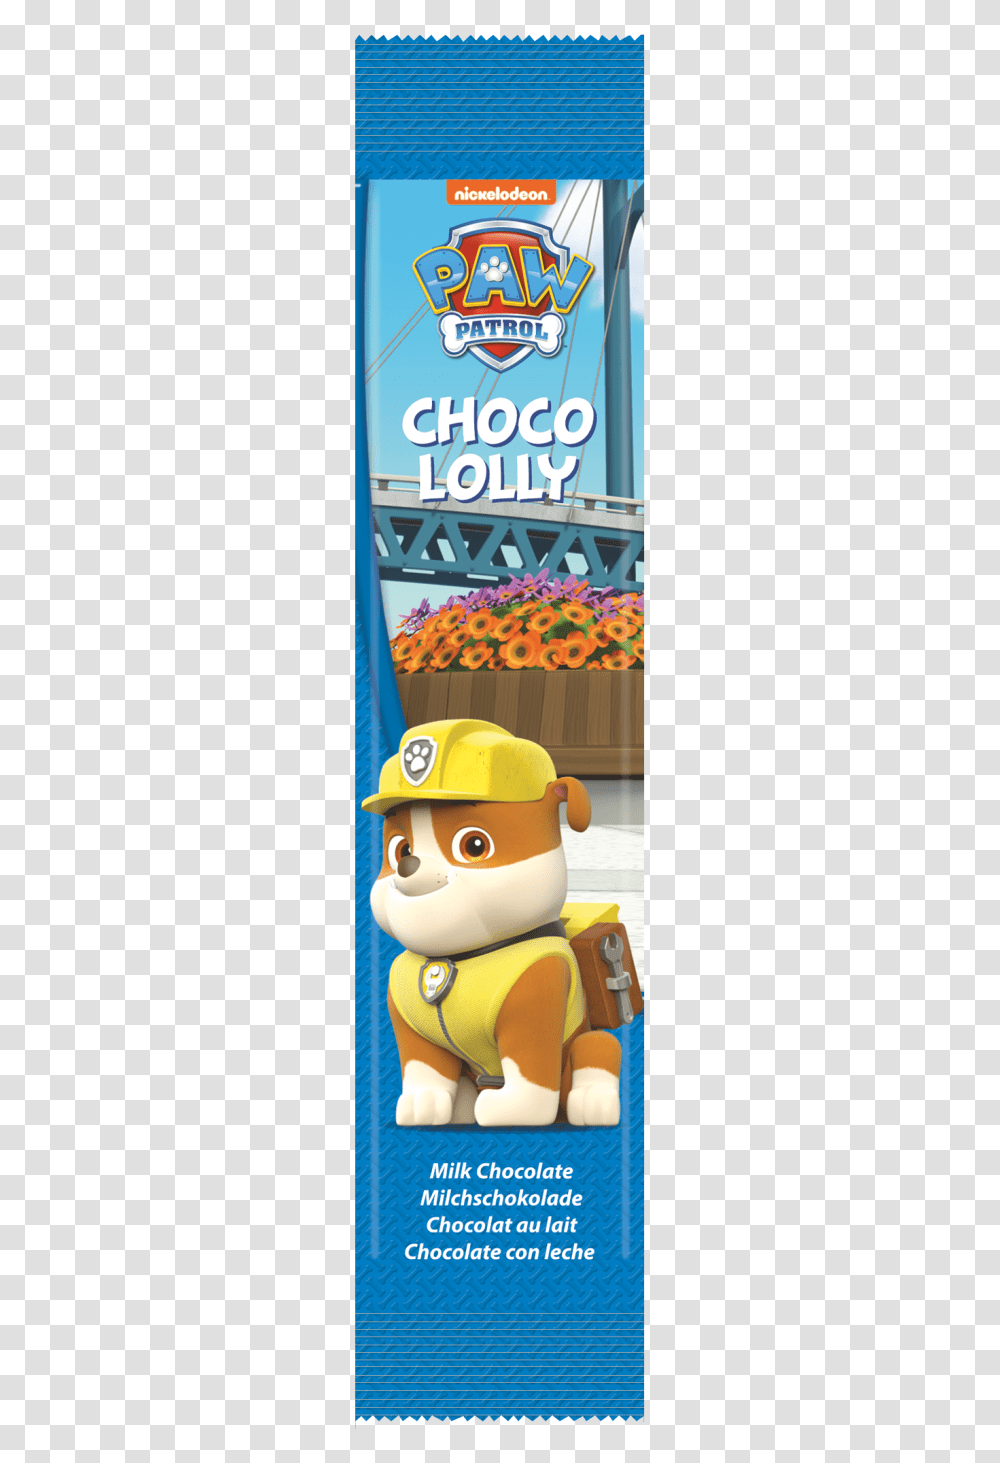 Paw Patrol Choco Lolly Rubble Download Mascot, Toy, Angry Birds, Helmet Transparent Png